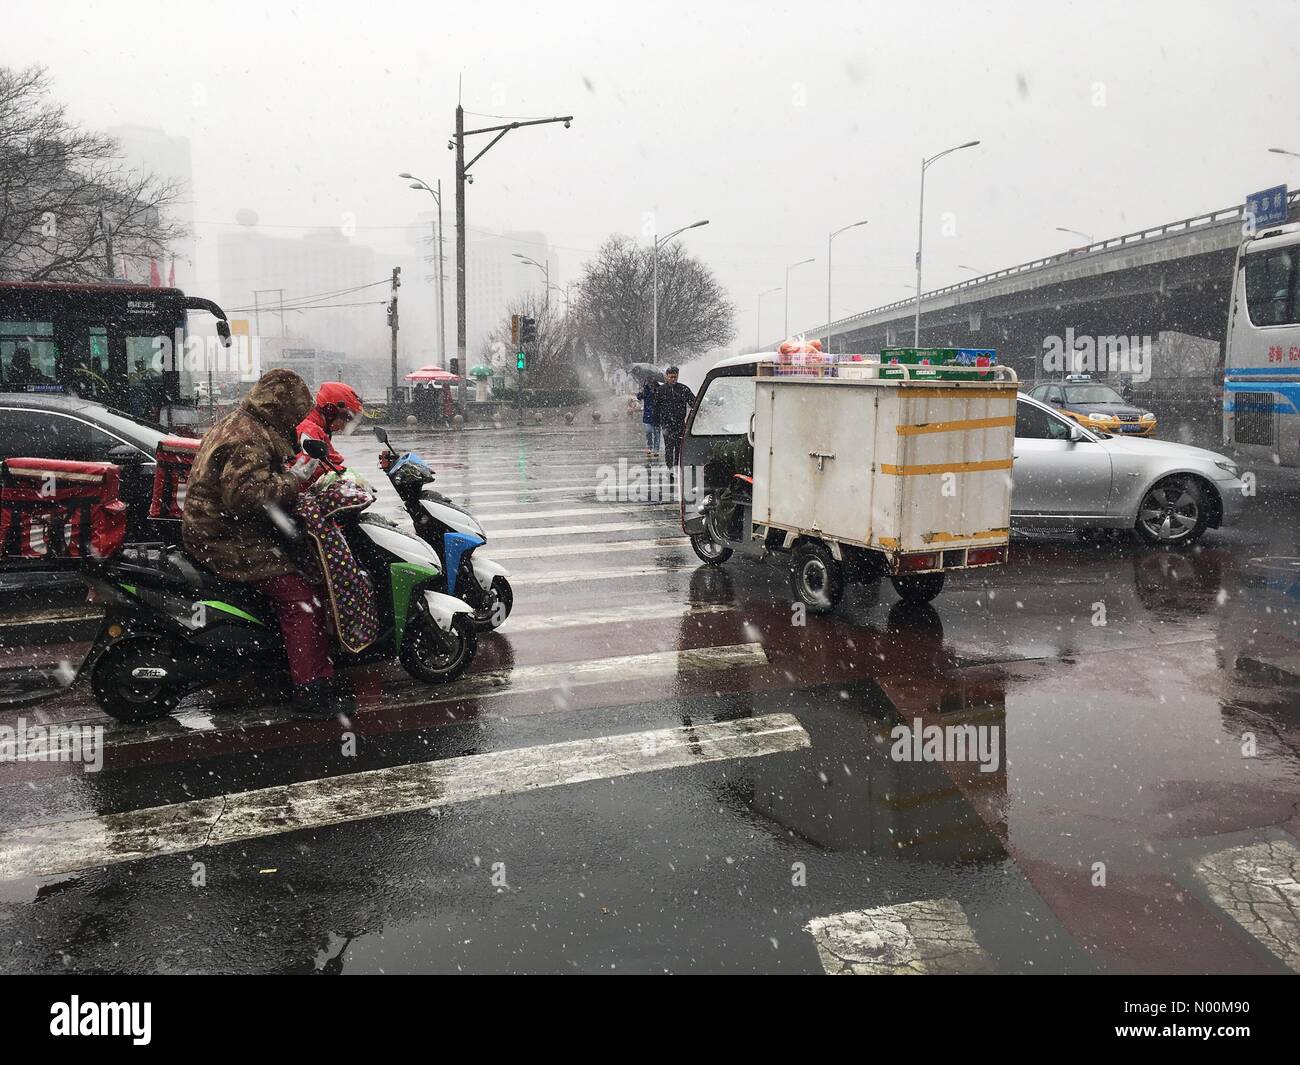 Beijing, China- March 17, 2018: First snowy day in Beijing, China (Chaoyang district) since winter 2016. Road intersection with electric scooters, trucks and cars. Credit: Irkin09/StockimoNews/Alamy Live News Stock Photo